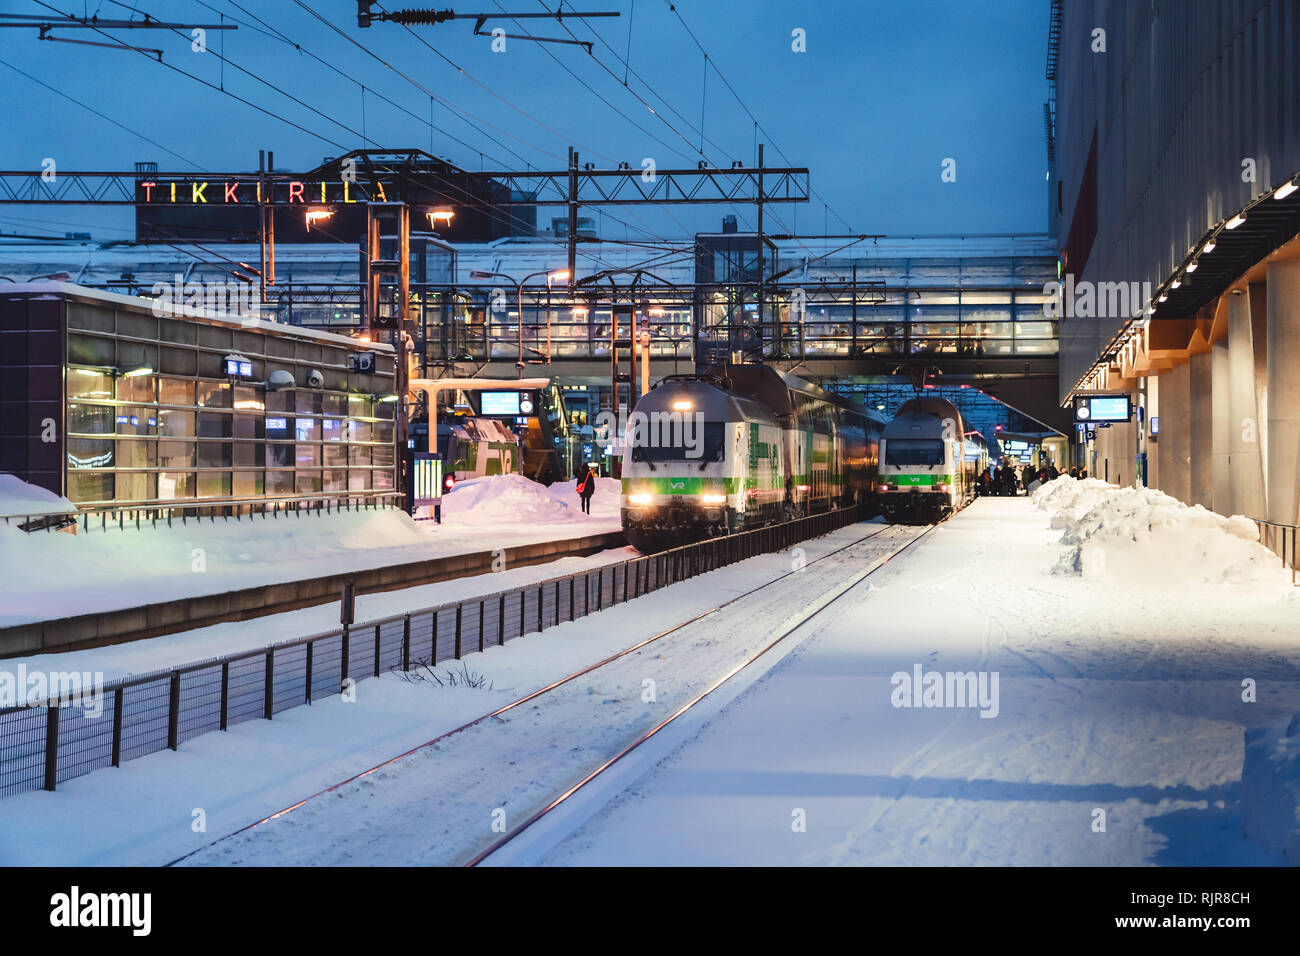 Editorial 01.18.2019 Vantaa Finland. Trains waiting to leave at the railway station in Tikkurila at winter Stock Photo